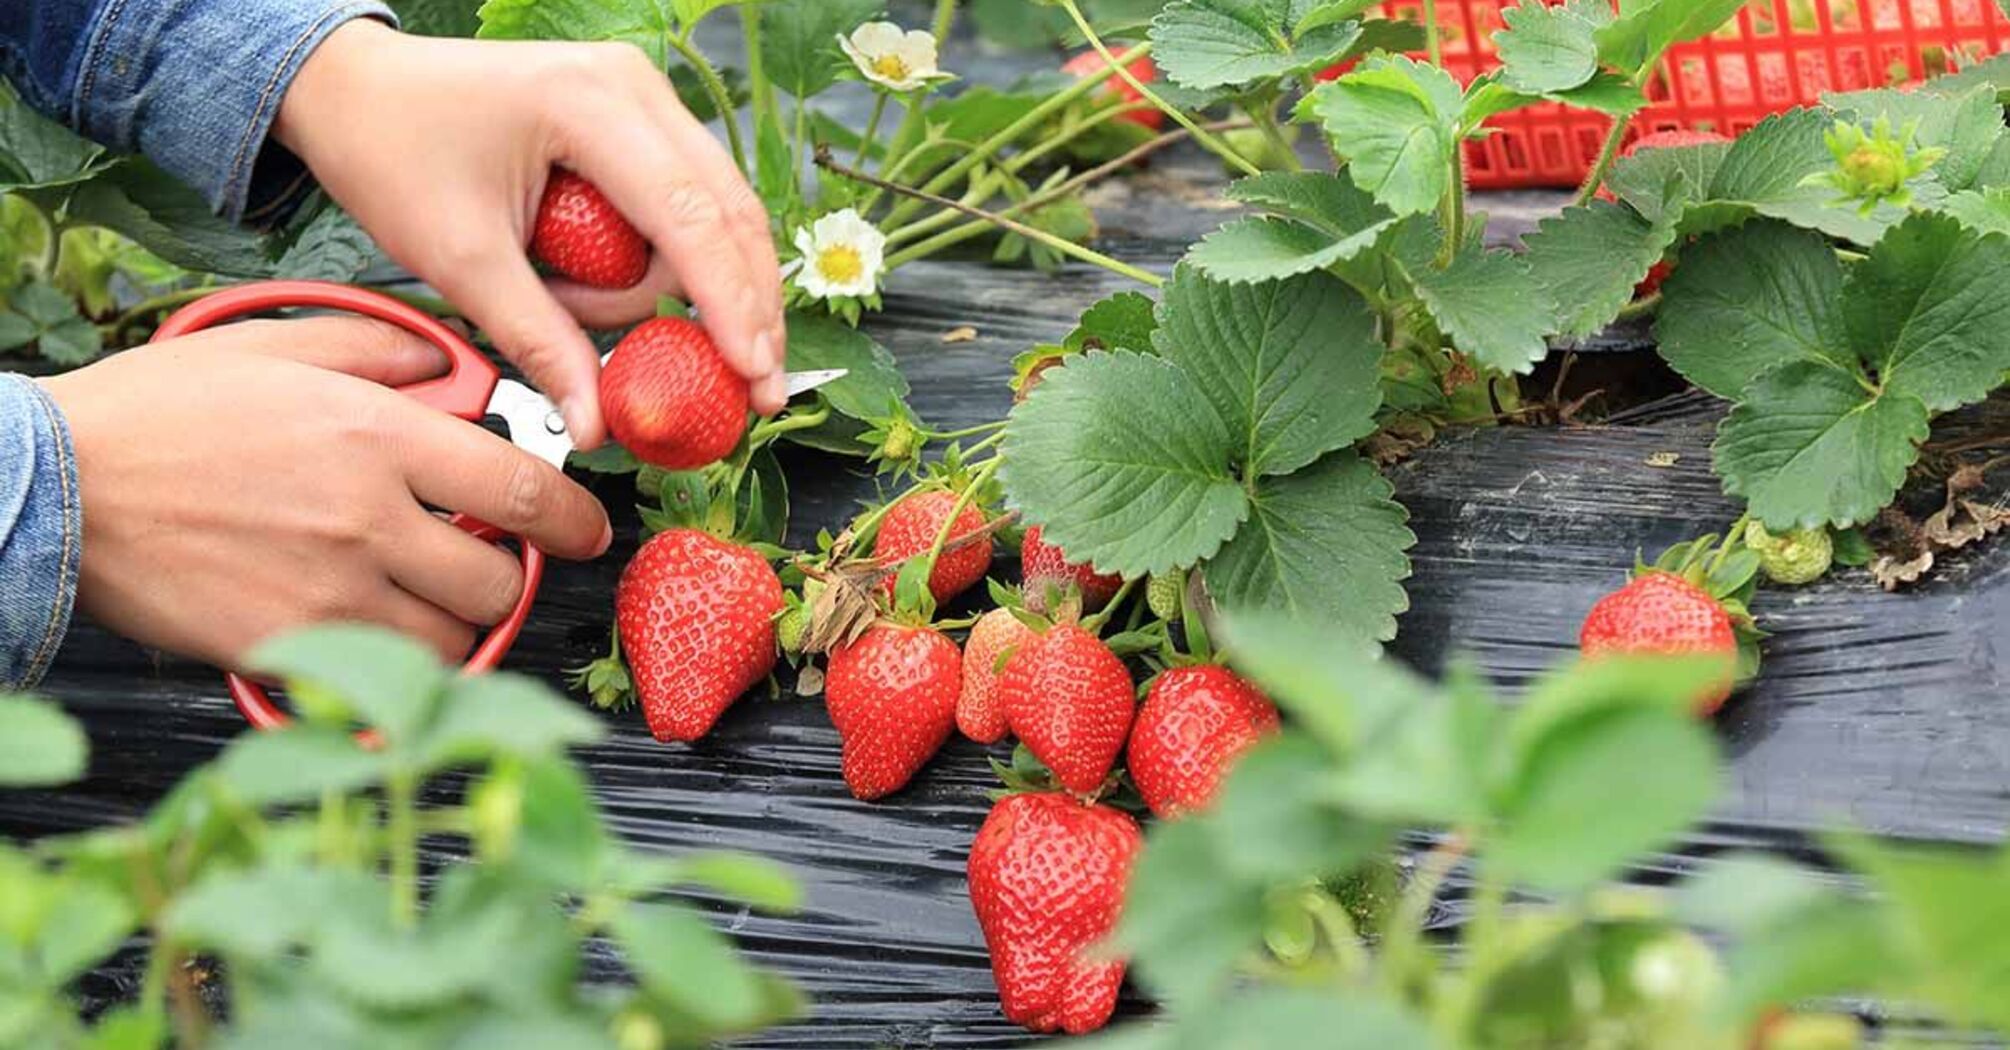 How to get the maximum strawberry harvest